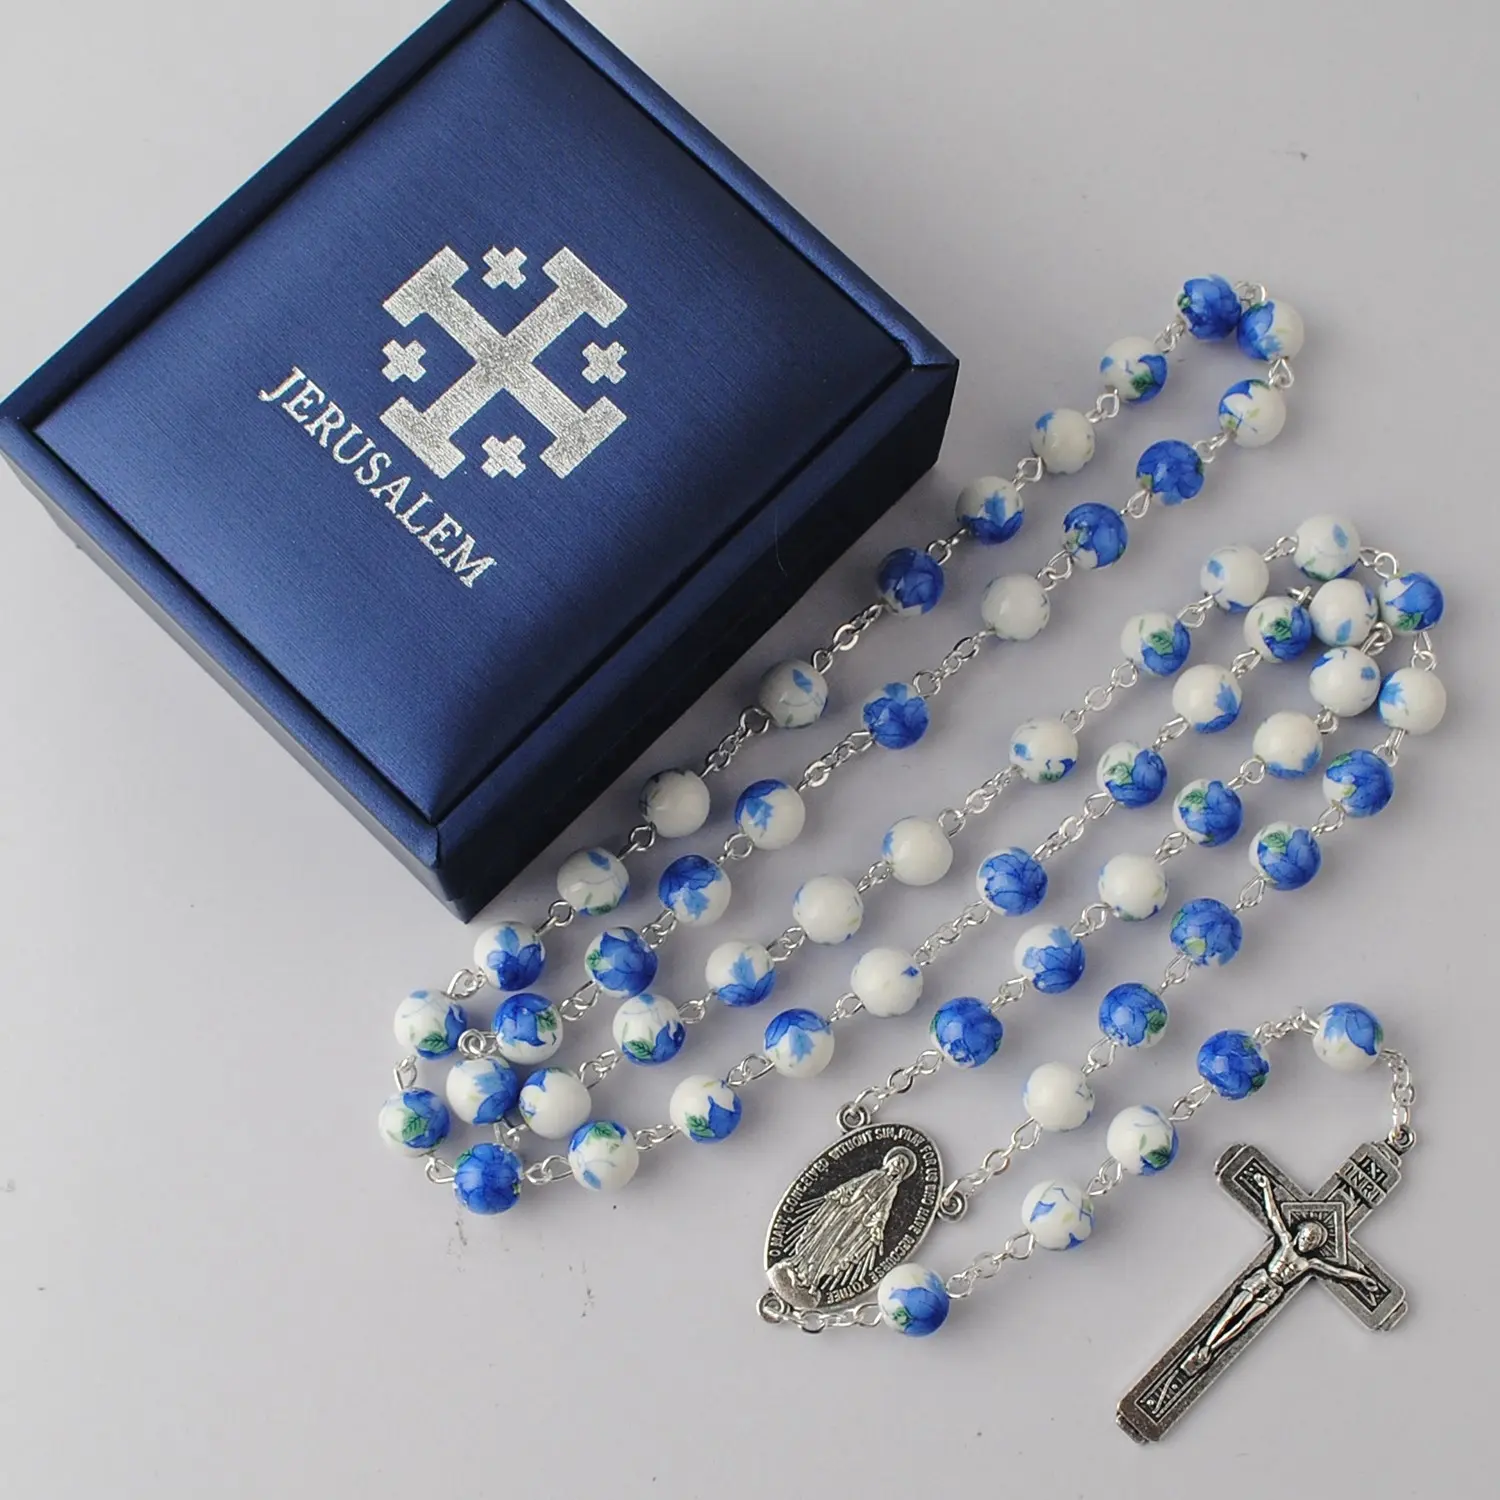 Blue Color Ceramic Beads Rosary Necklaces Catholic Religious Jewelry with Silver Chain in Jerusalem Leather Gift Box